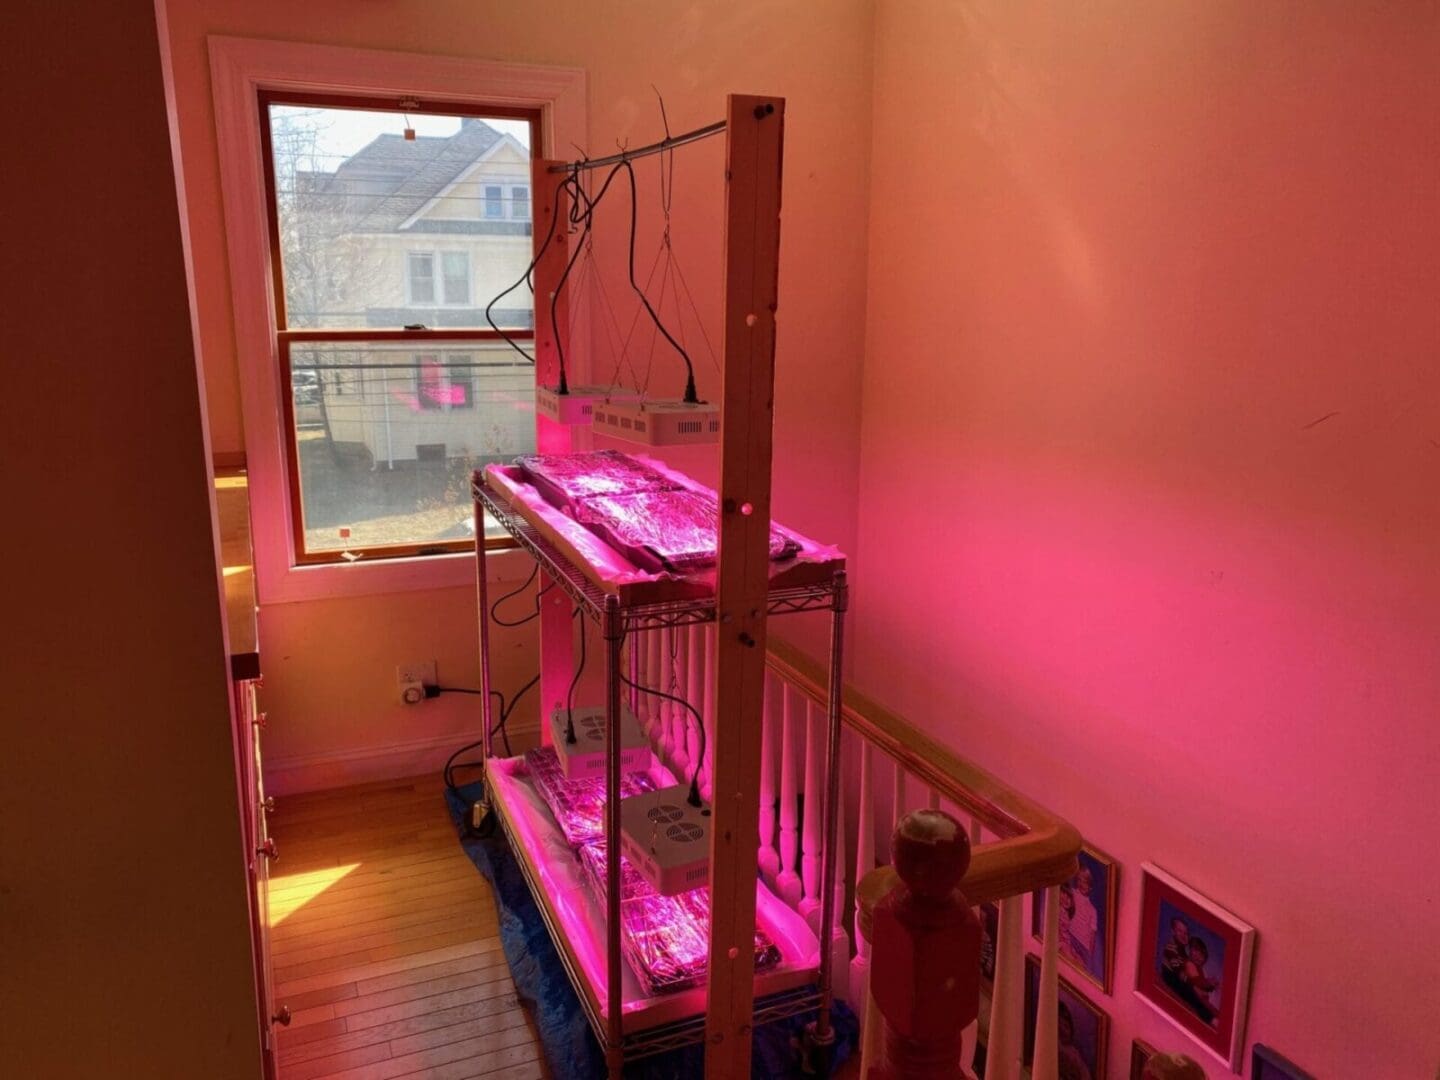 A stairway with a pink light on it.